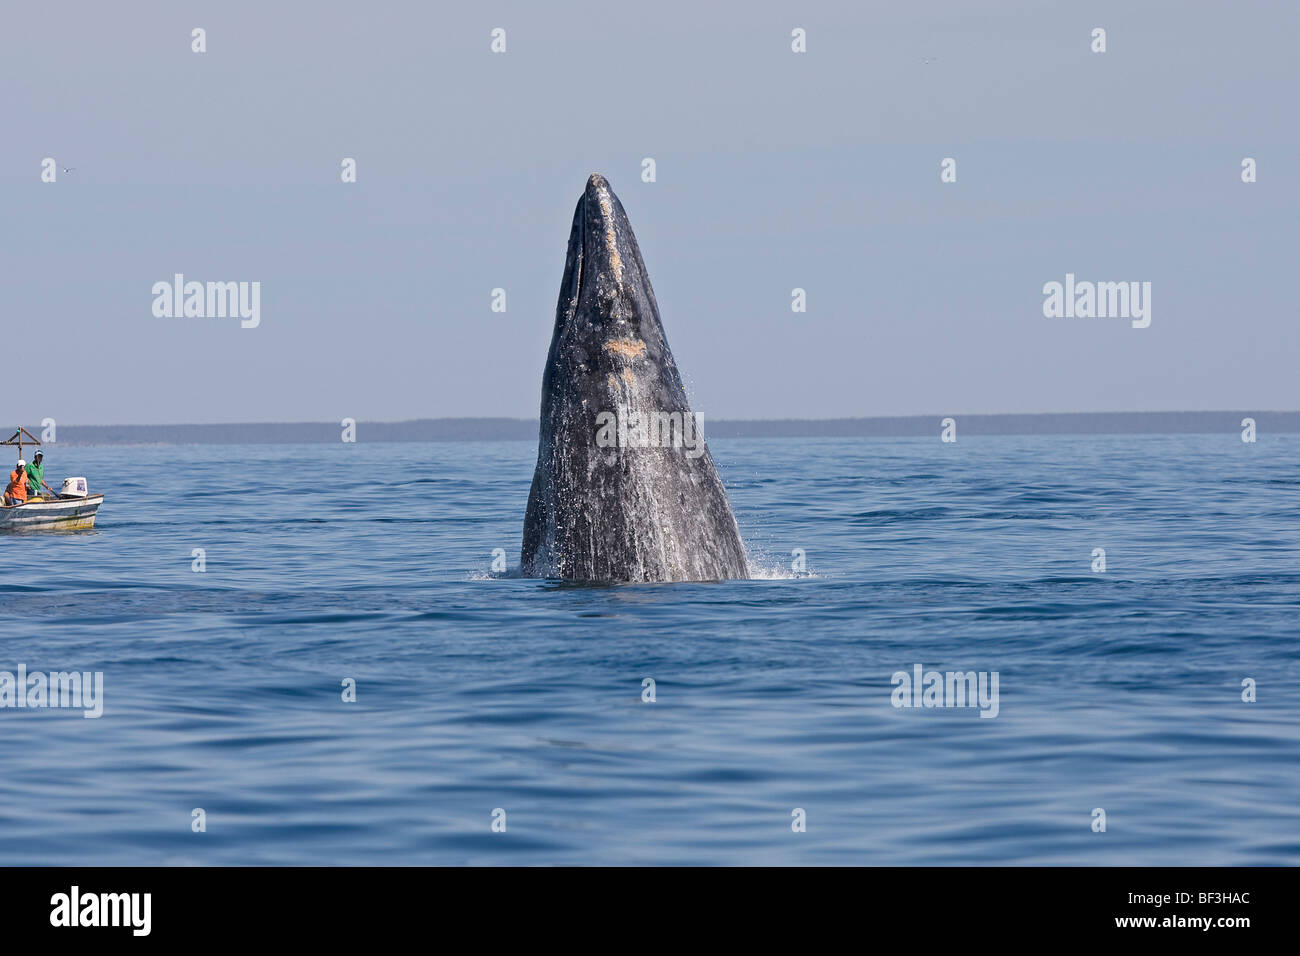 Gray Whale, Grey Whale (Eschrichtius robustus, Eschrichtius gibbosus) spyhopping in front of whale-watching boats. Stock Photo